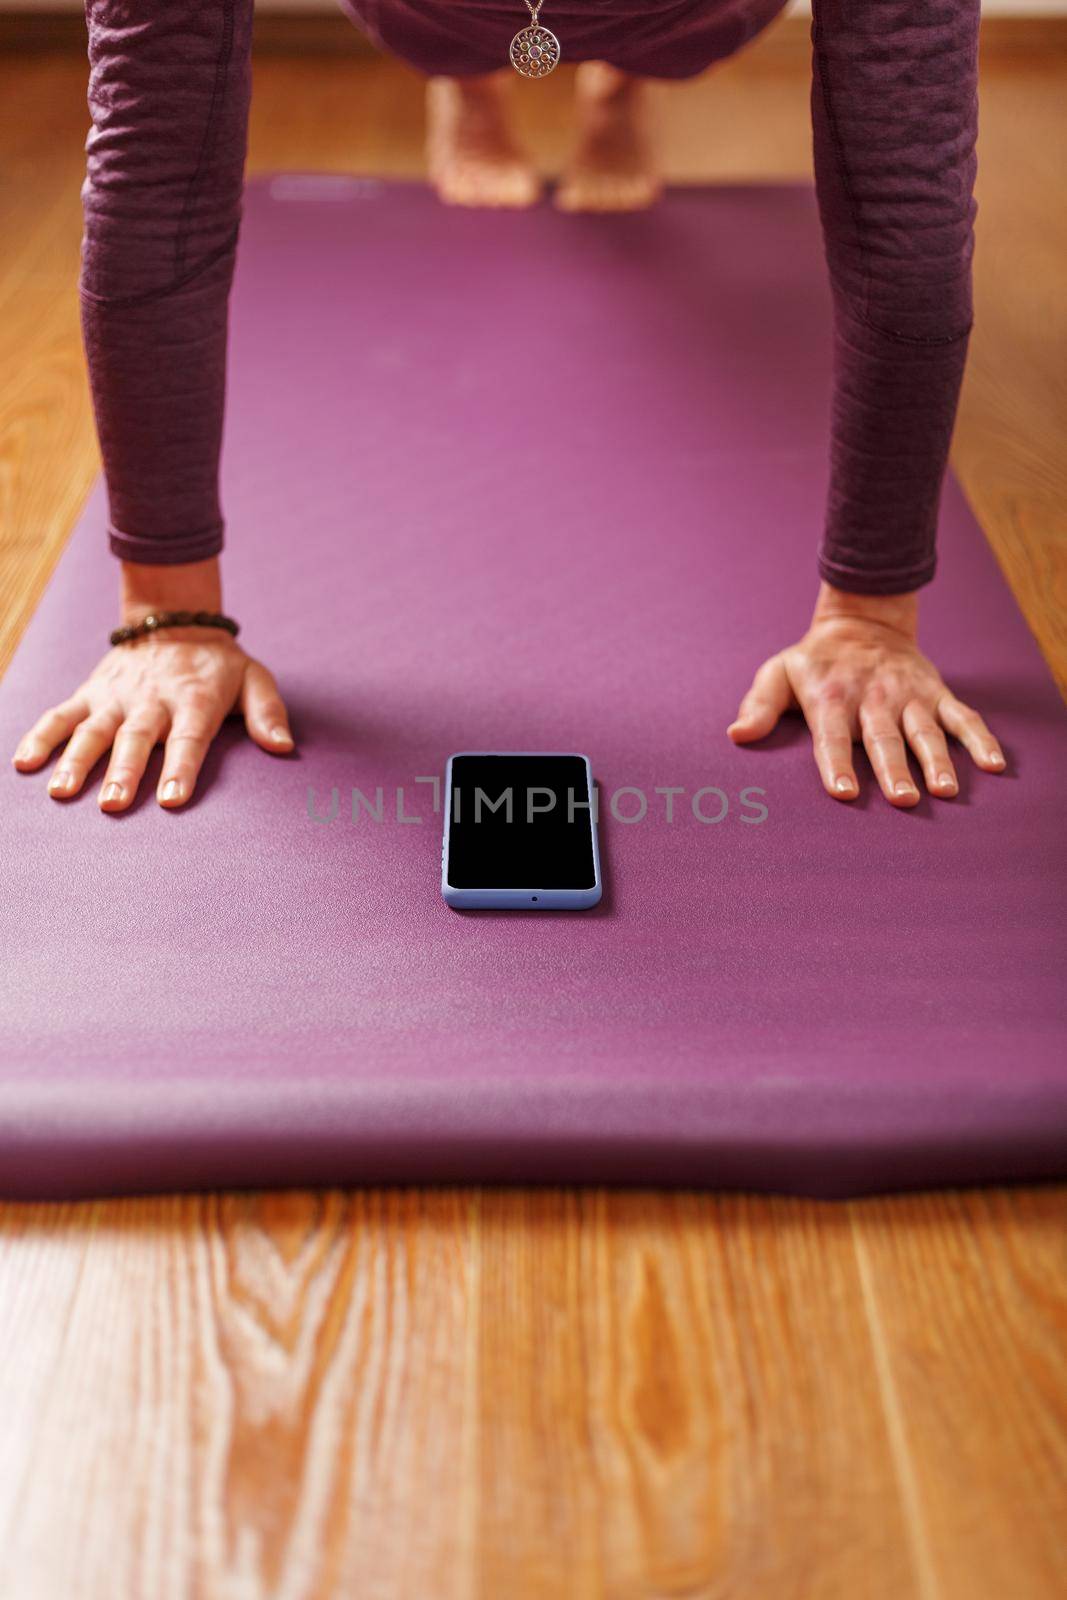 Yoga online training workout by smartphone, using the fitness app at home in the gym. Online yoga and meditation practices. Place on the smartphone screen